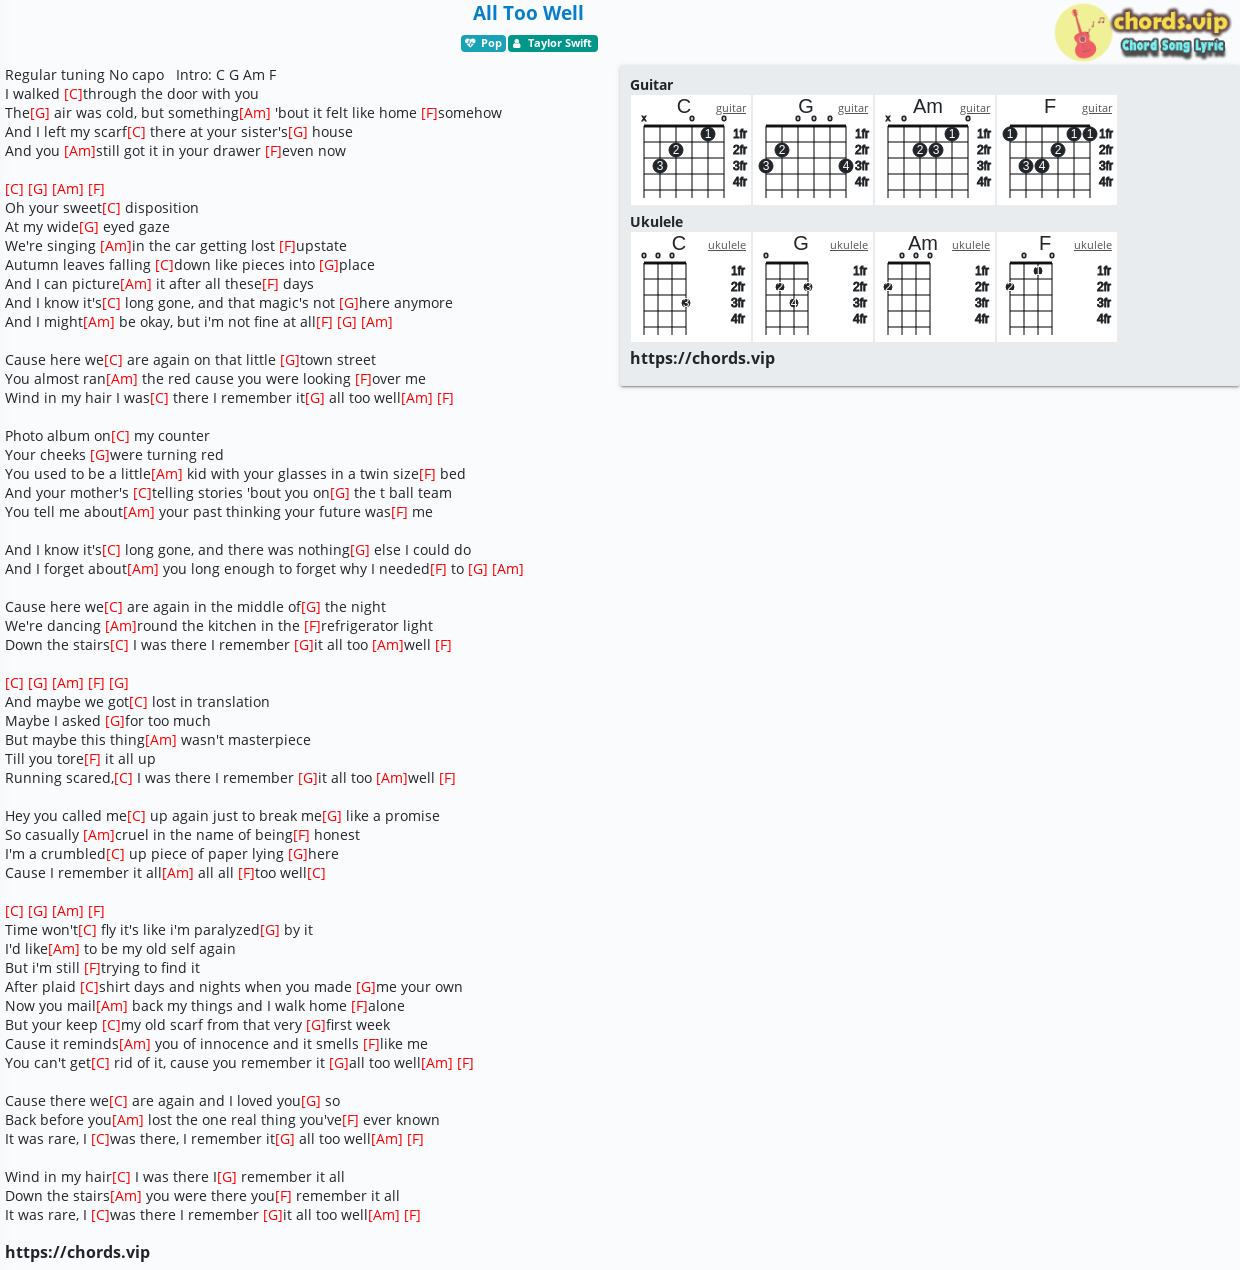 Chord: All Too Well - Taylor Swift - tab, song lyric, sheet, guitar